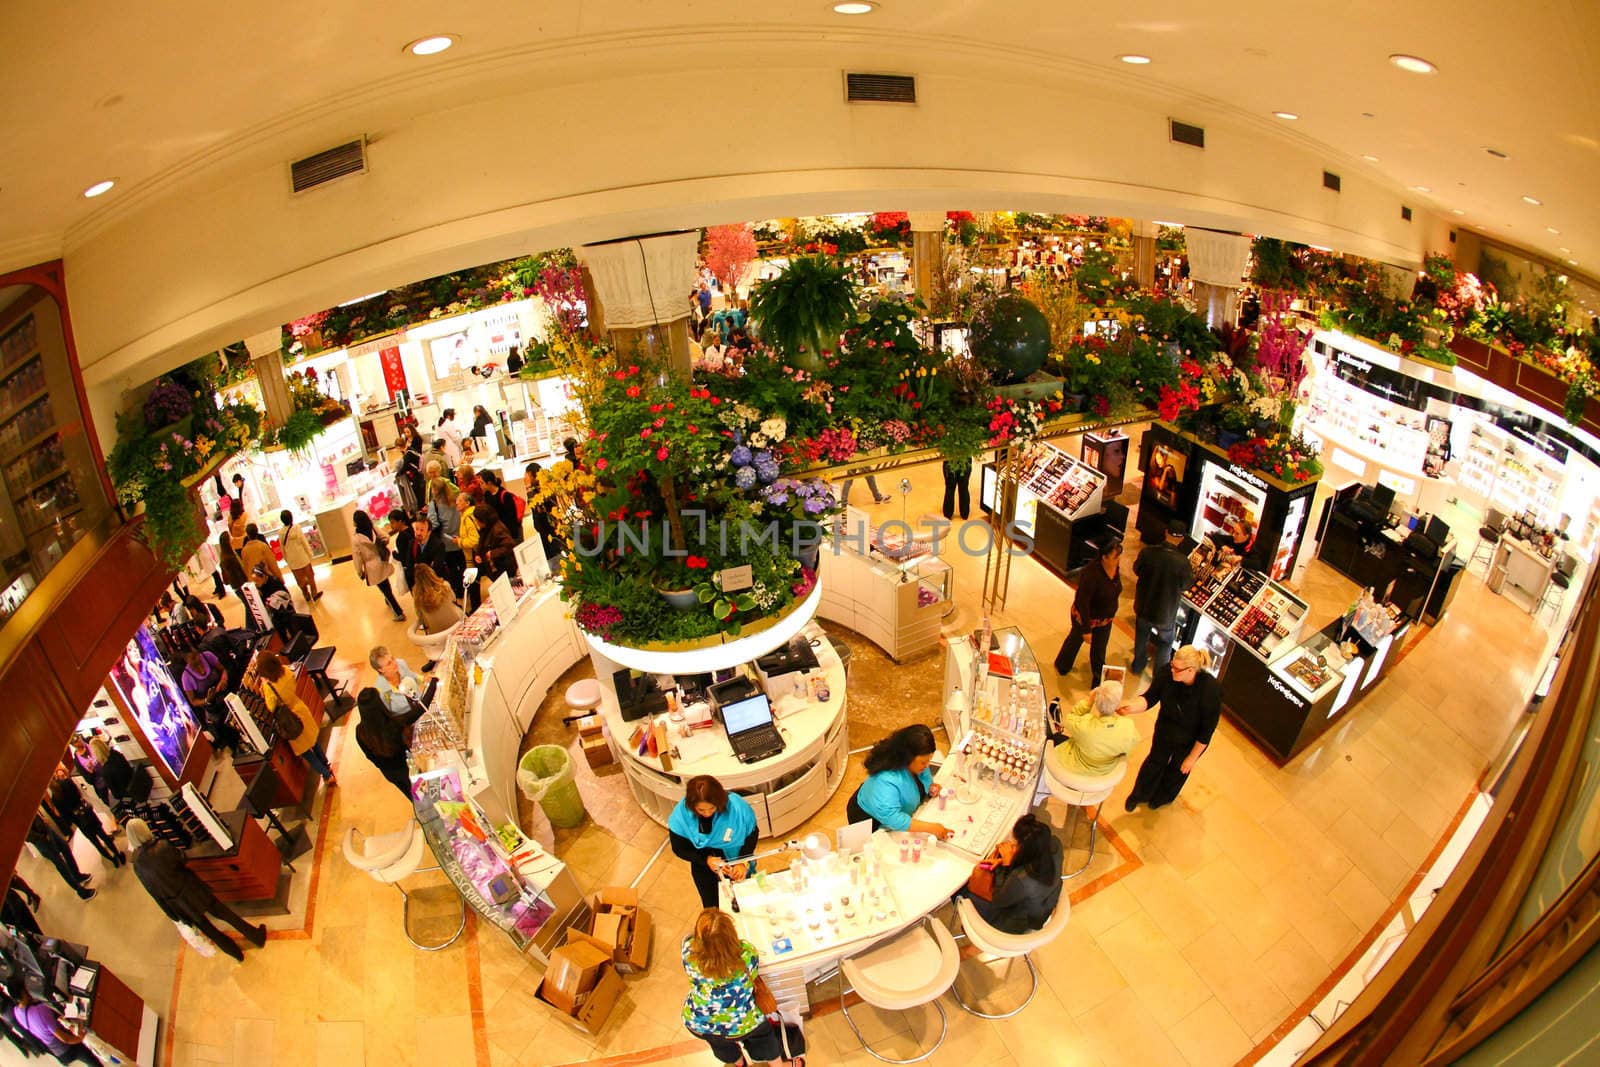 New York City, April 17,2009: The famous Macy's Flower Show in the department store at the Herald Square in midtown Manhattan.